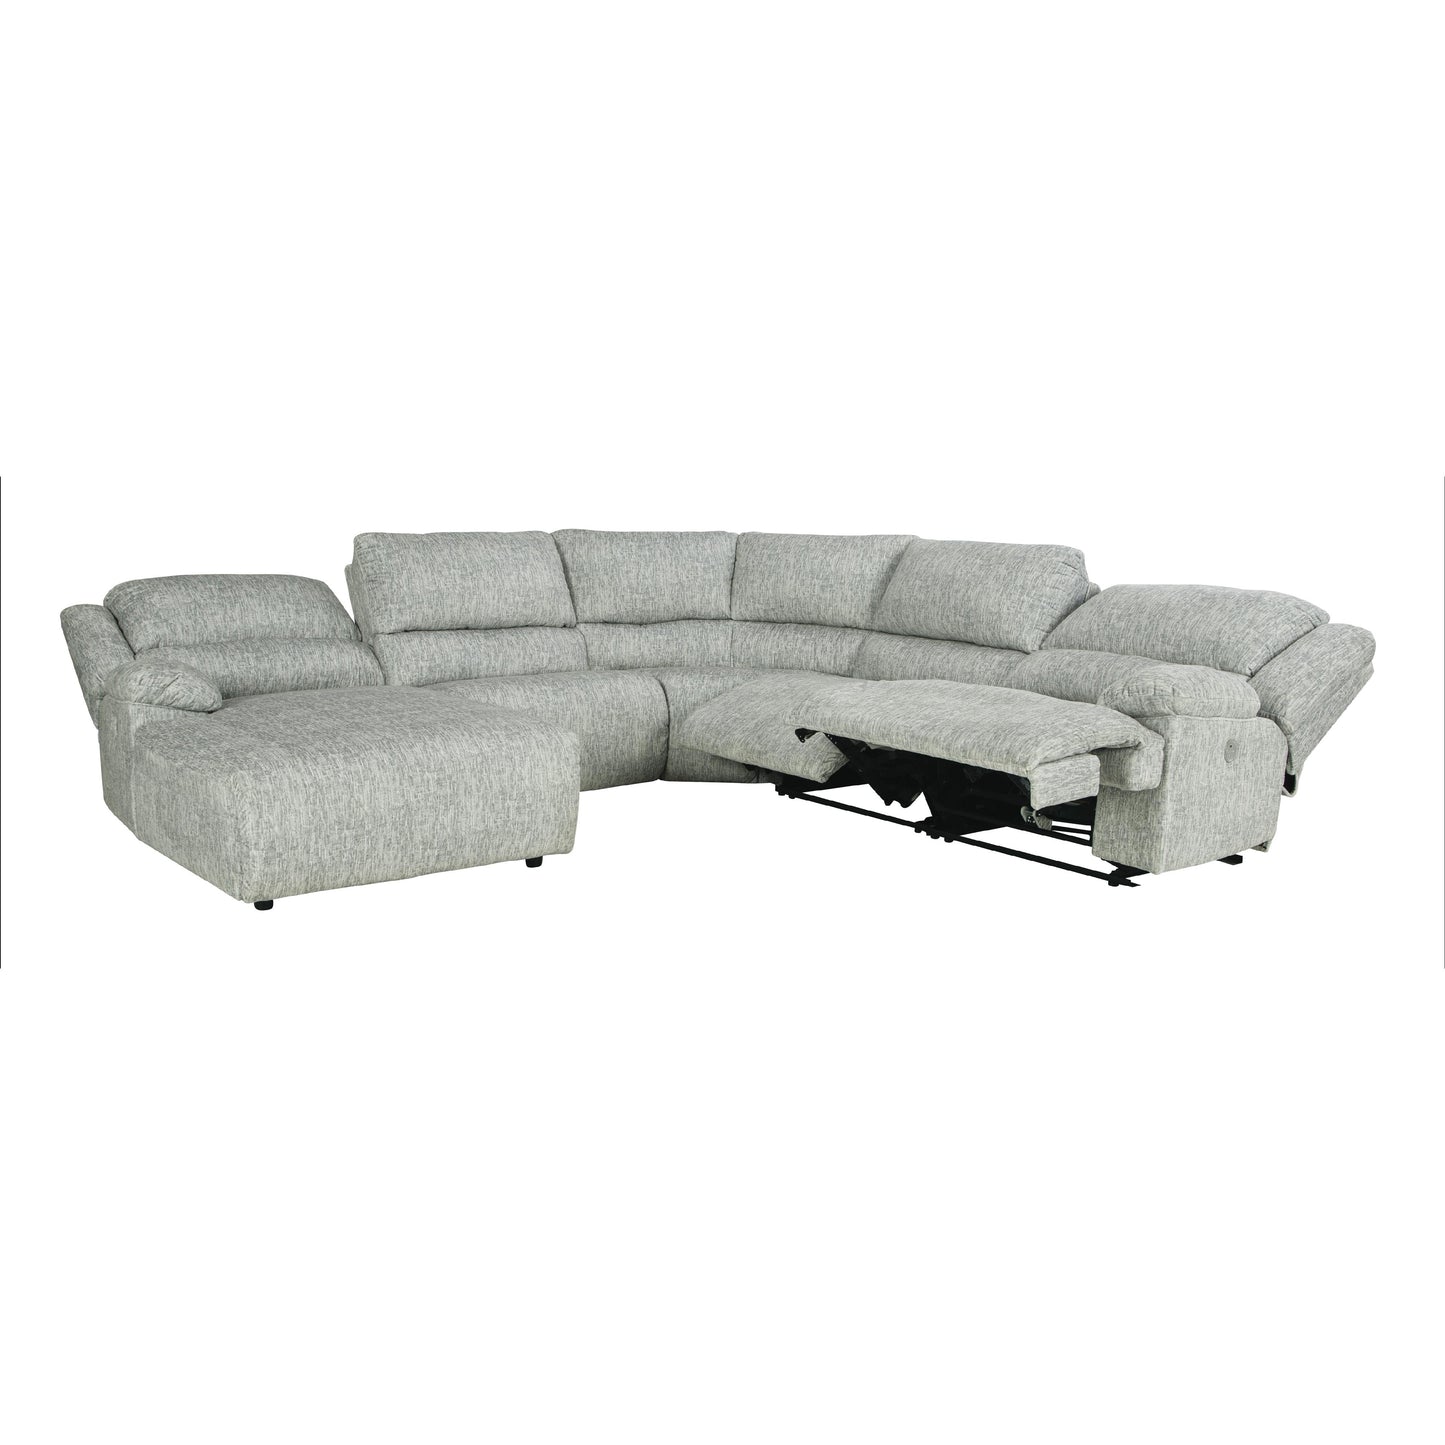 Signature Design by Ashley McClelland Power Reclining Fabric 5 pc Sectional 2930279/2930246/2930277/2930219/2930262 IMAGE 2